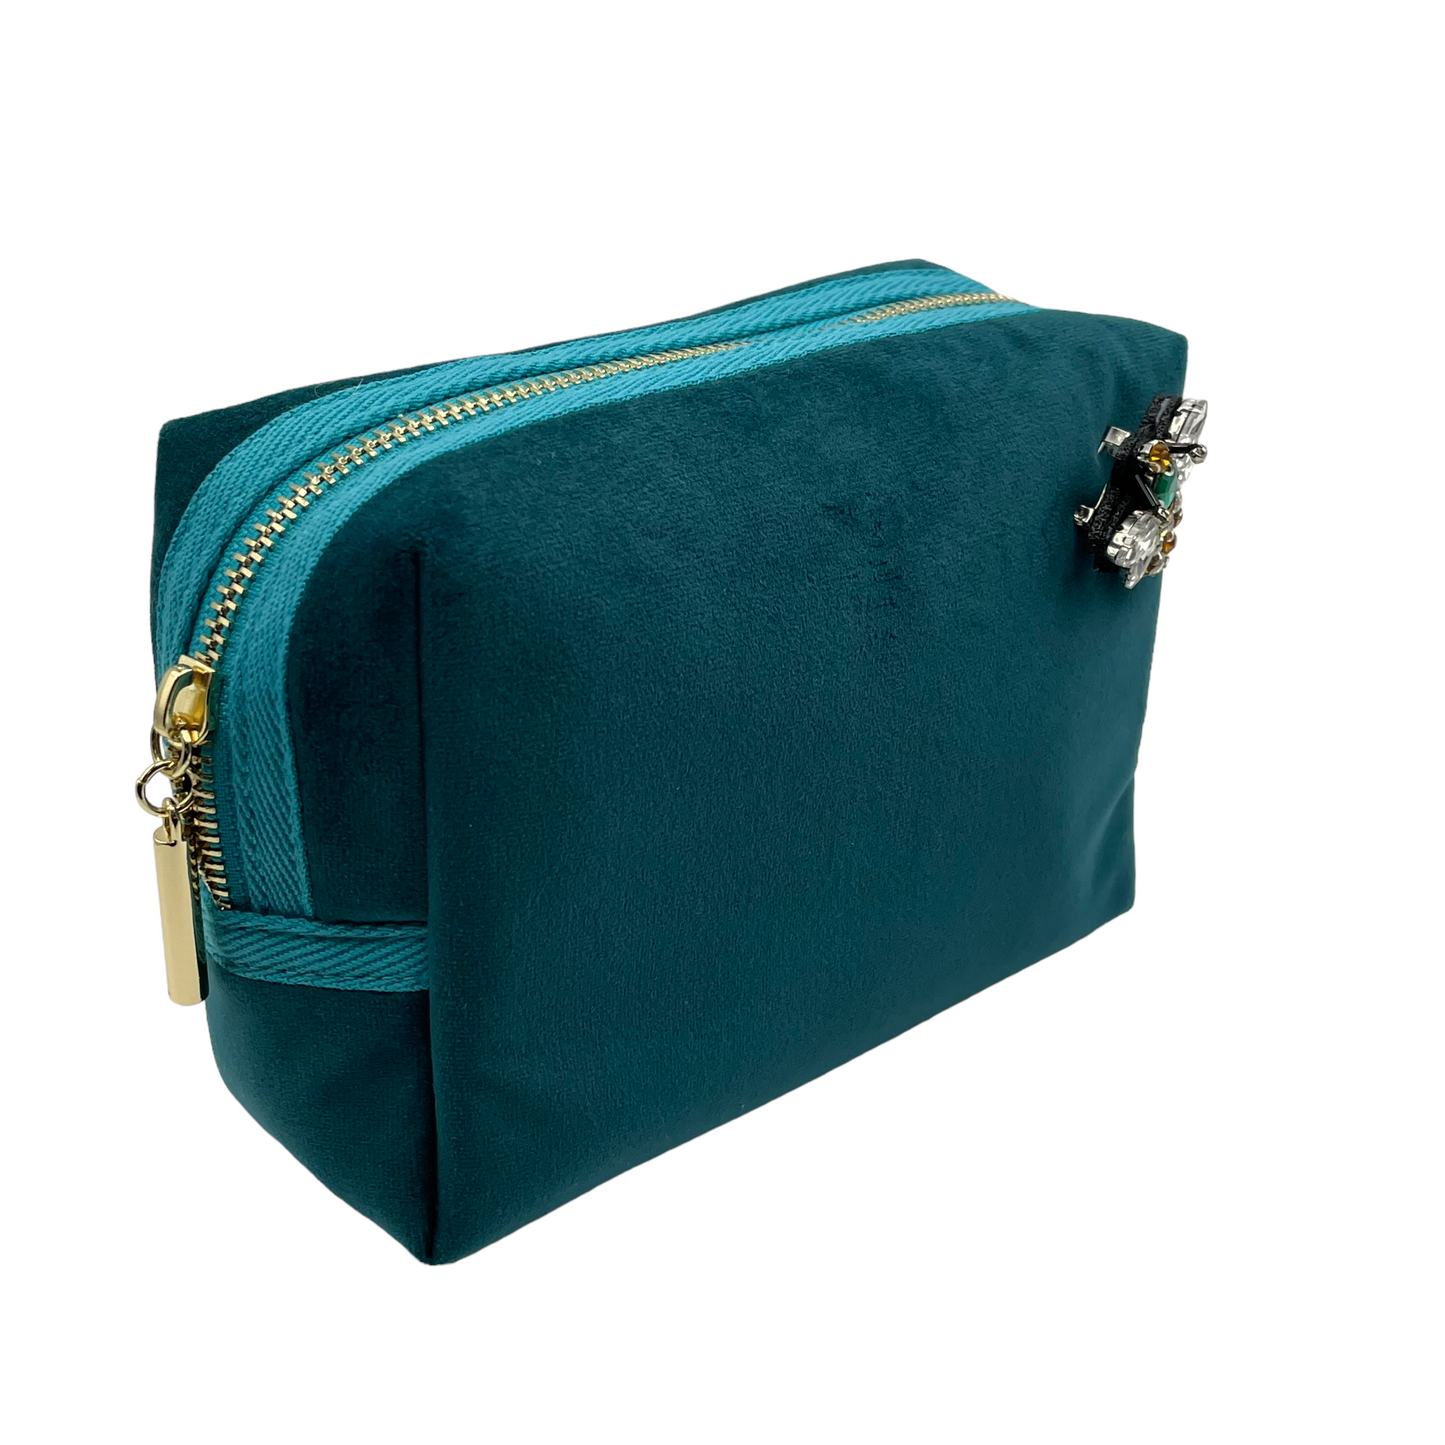 Teal make-up bag & queen bee pin - recycled velvet